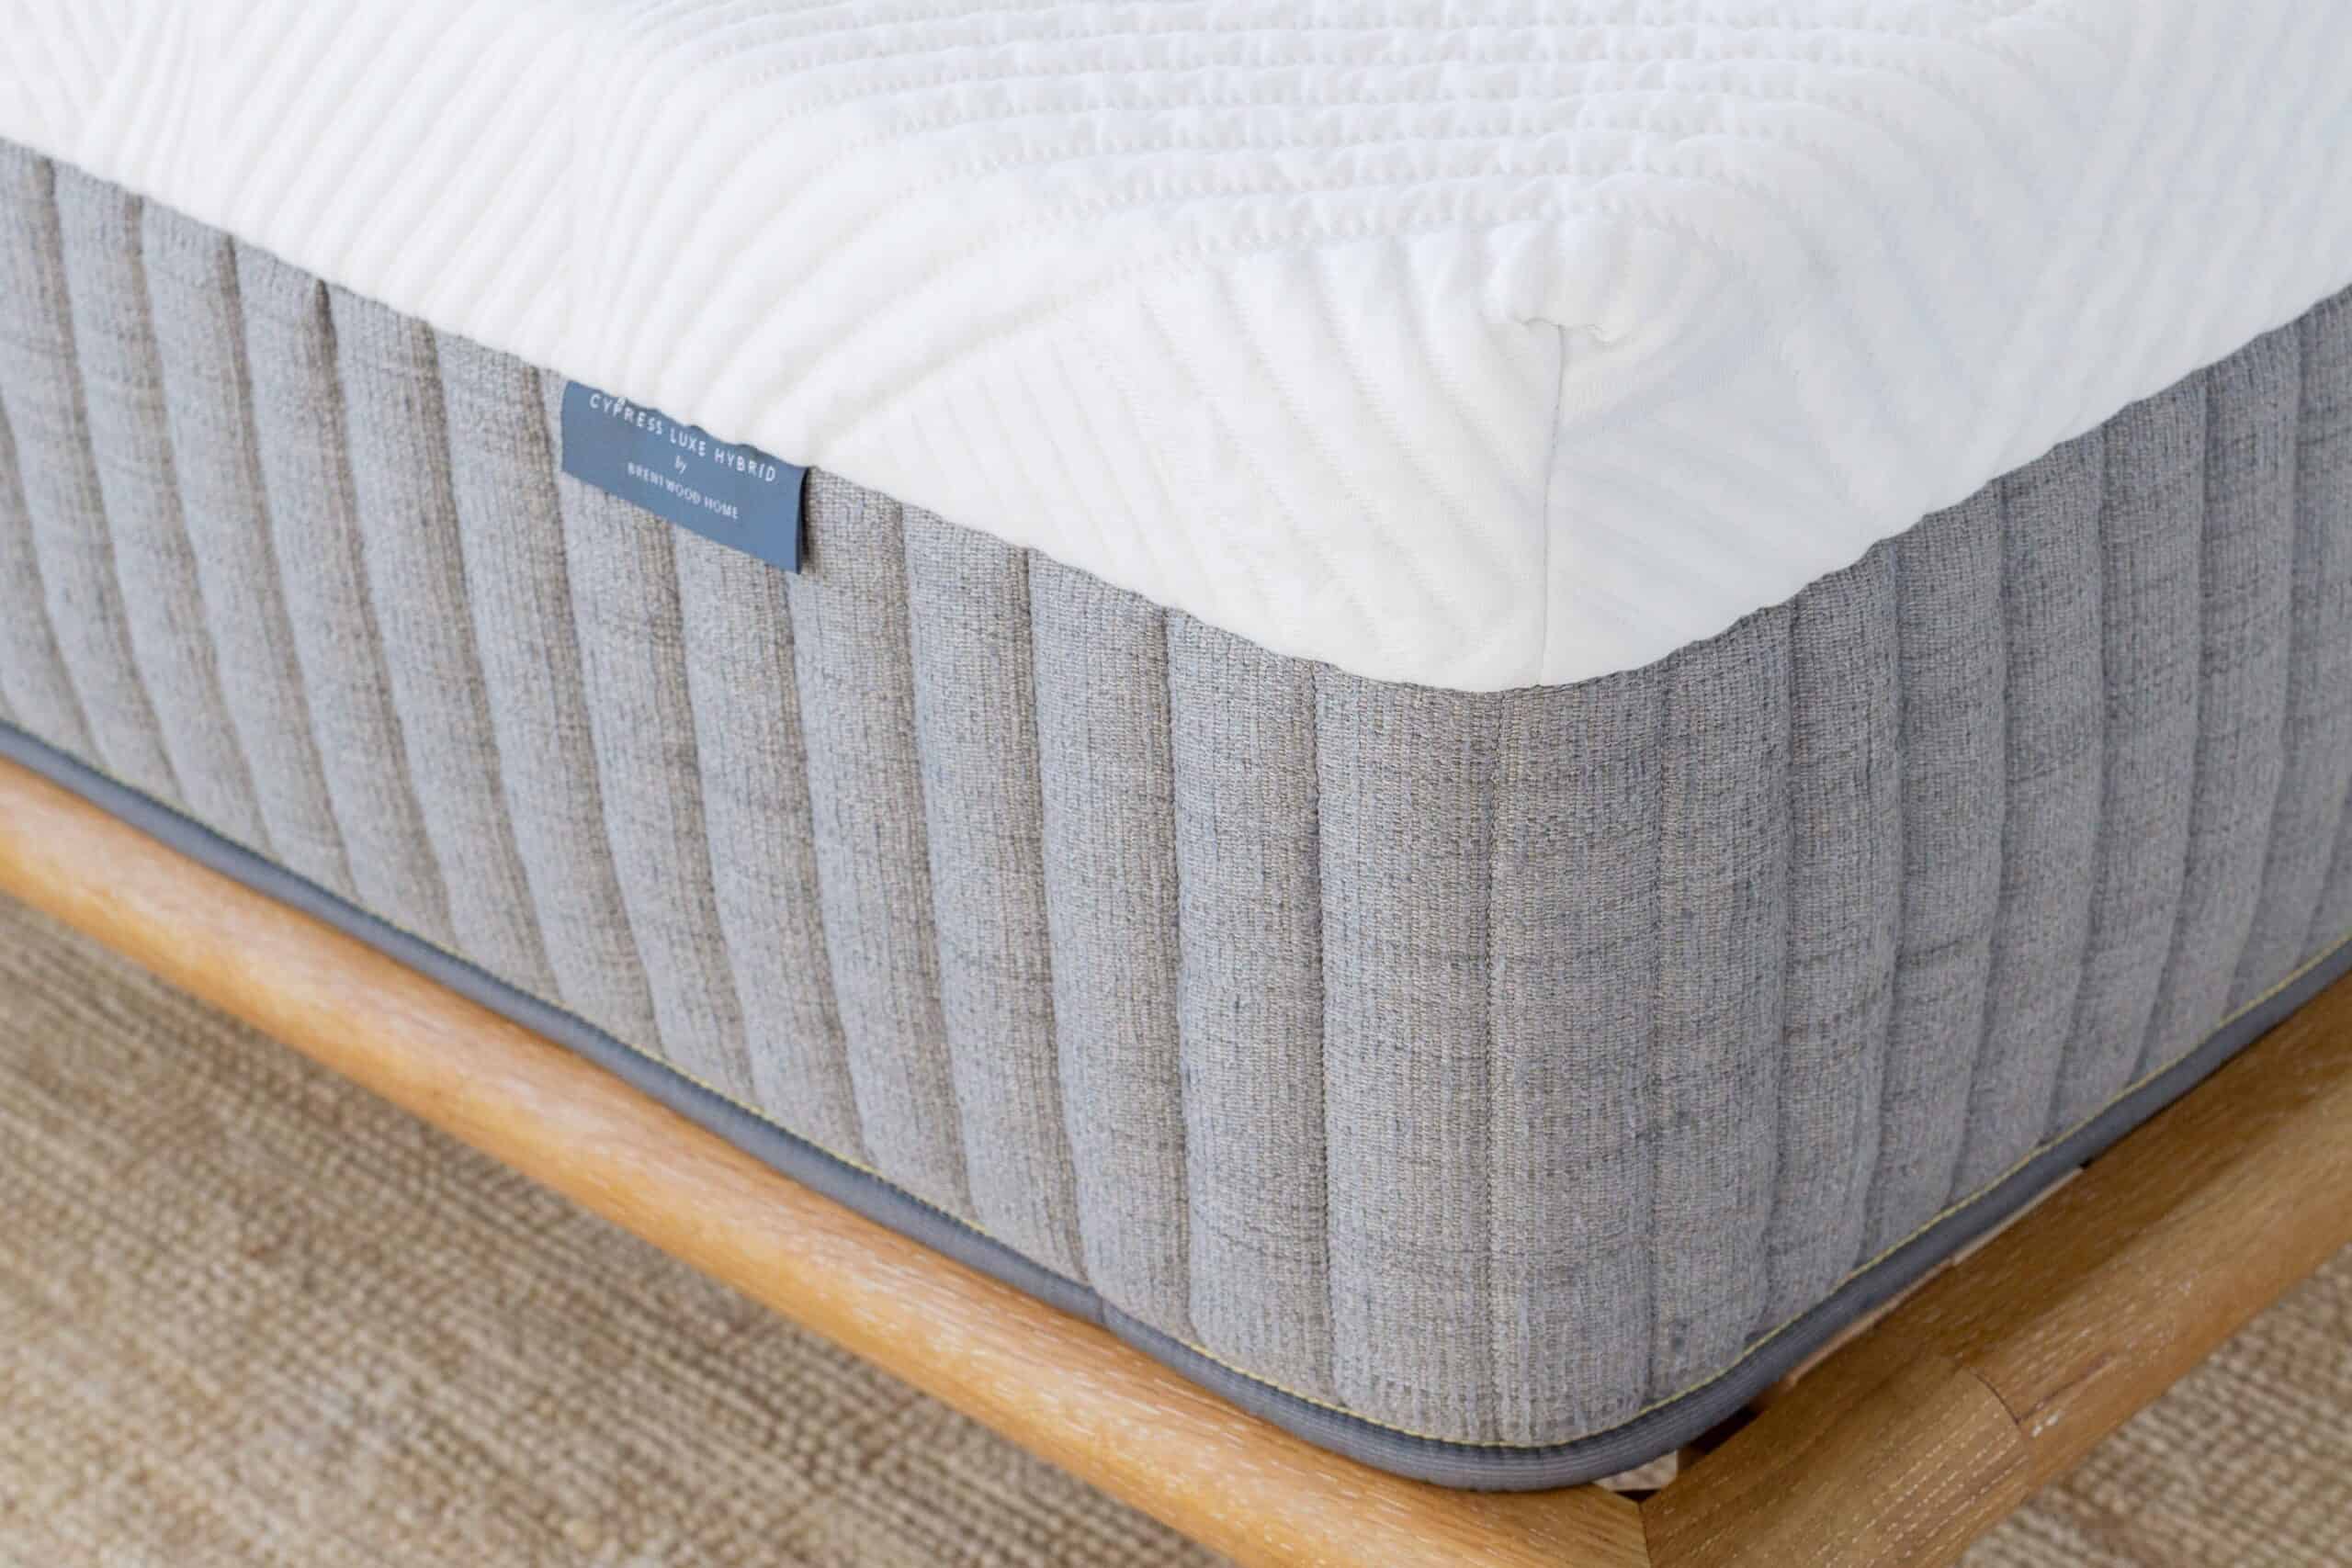 How To Know If A Mattress Has Fiberglass